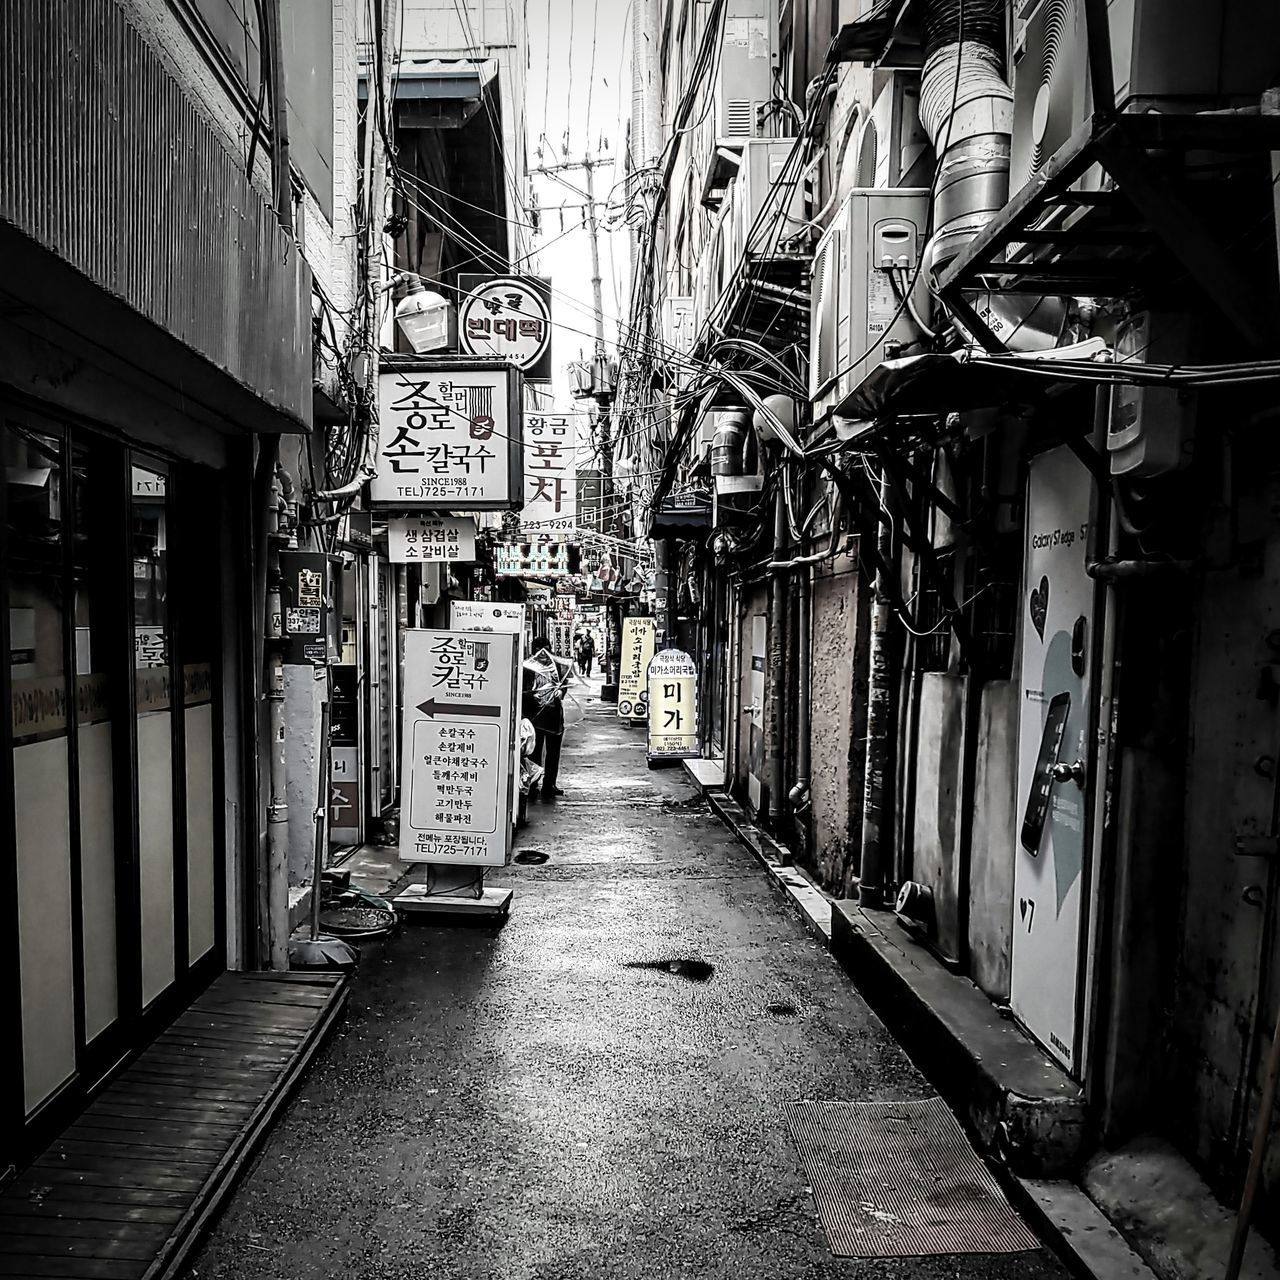 road, alley, street, architecture, infrastructure, urban area, built structure, building exterior, black, the way forward, monochrome, white, black and white, city, building, monochrome photography, lane, darkness, day, snapshot, narrow, residential district, no people, outdoors, footpath